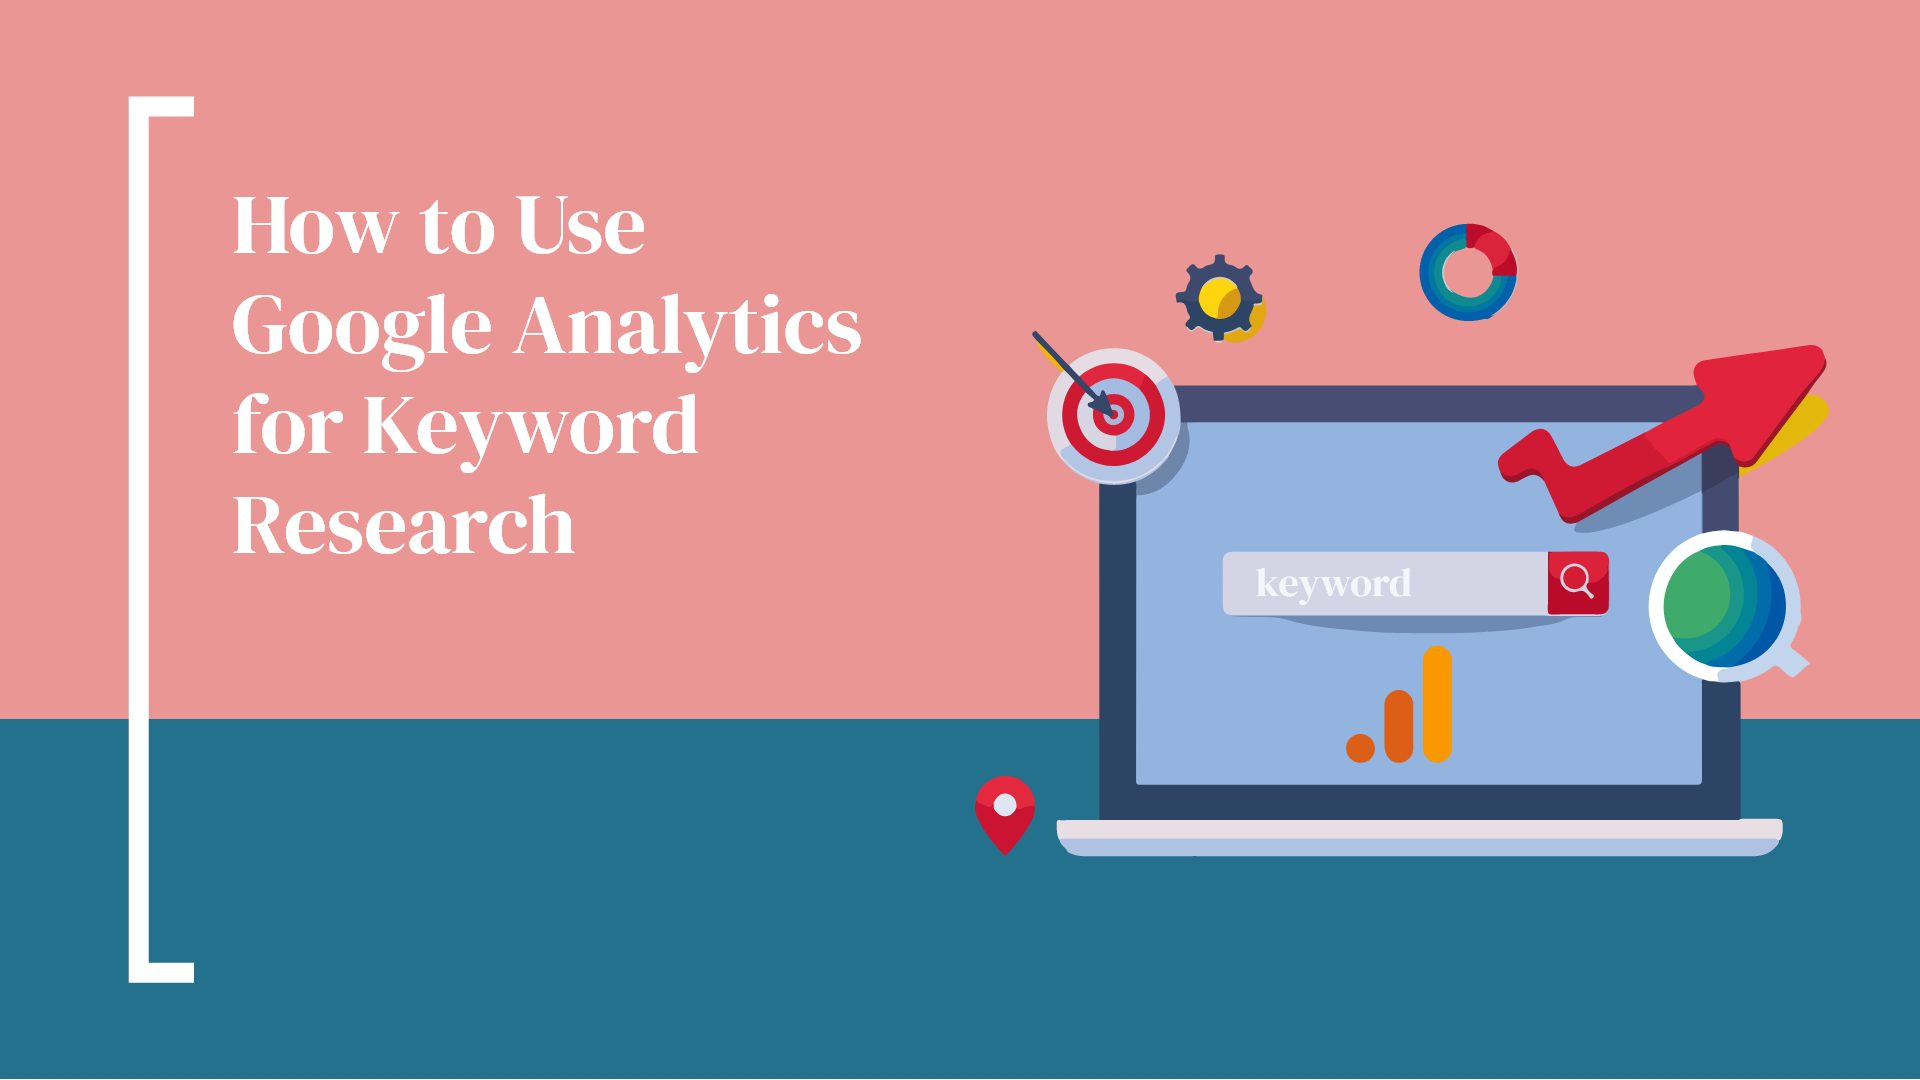 How to Use Google Analytics for Keyword Research